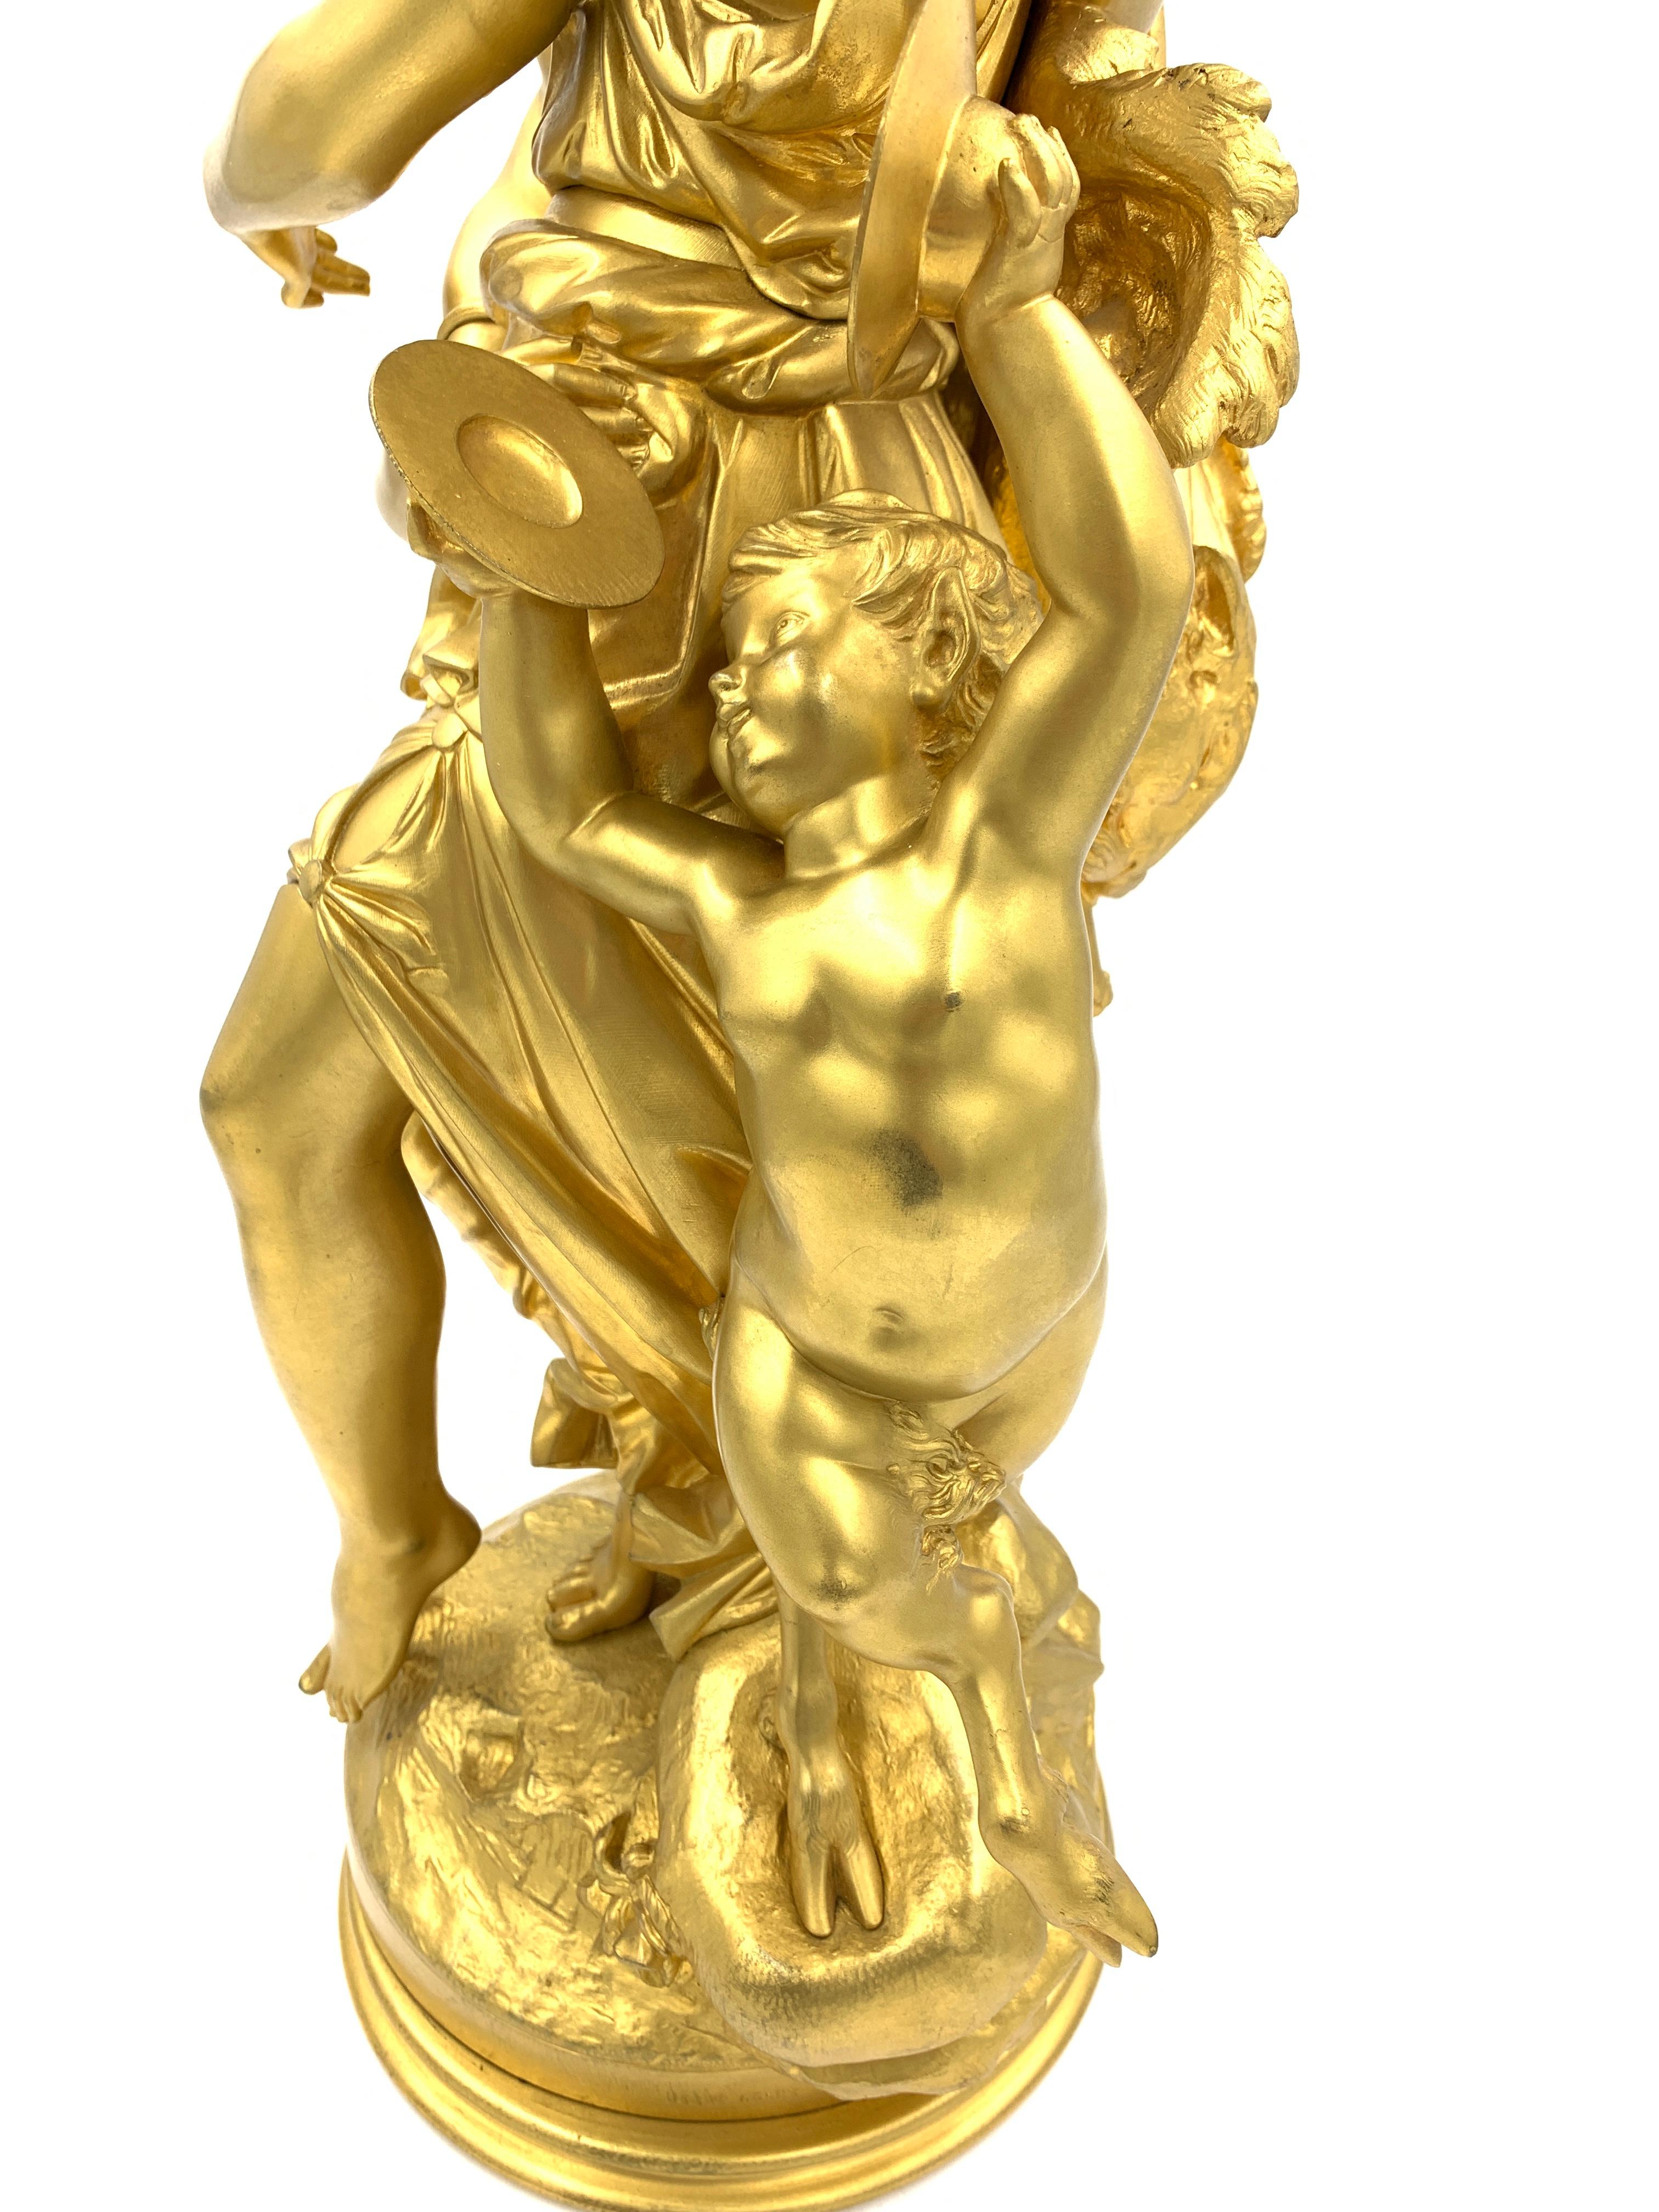 19th Century Fine French Gilt Bronze Bacchic Figural Group